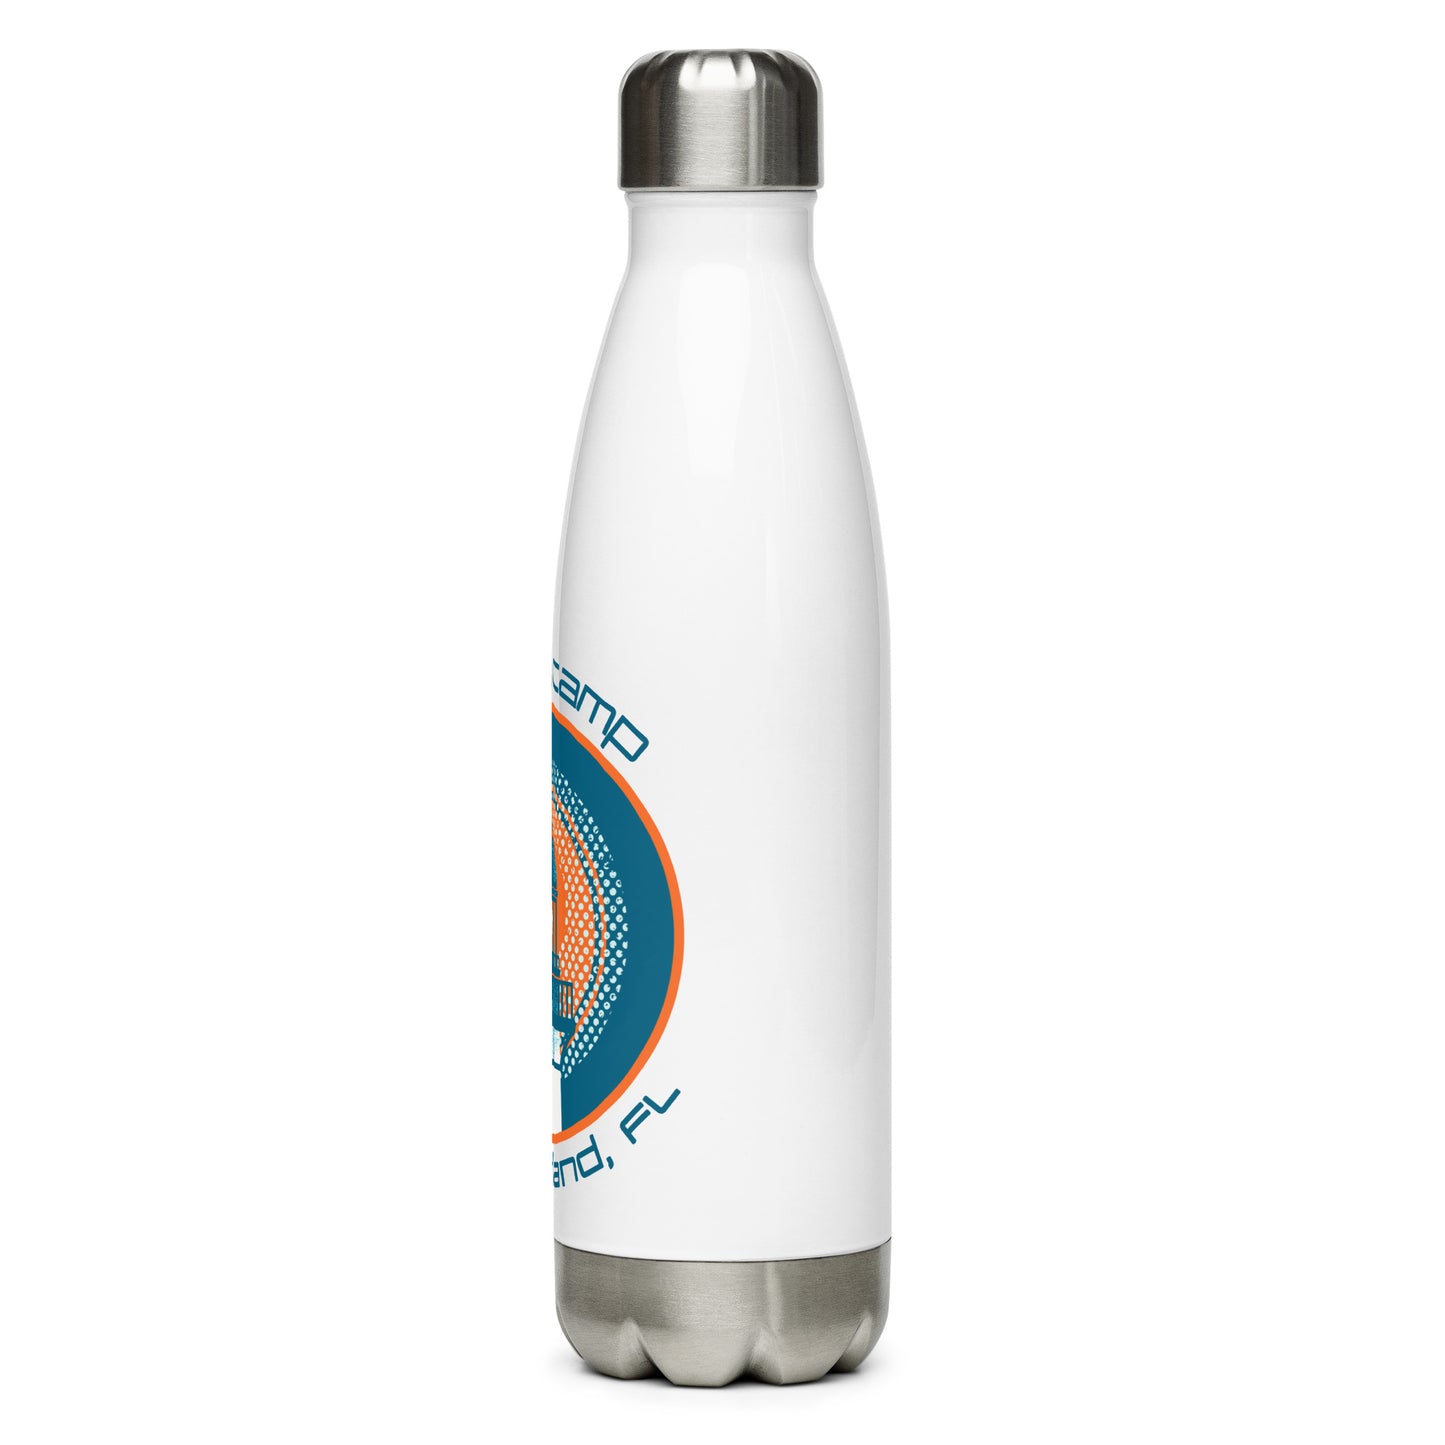 Base Camp Amelia Island Stainless Steel Water Bottle